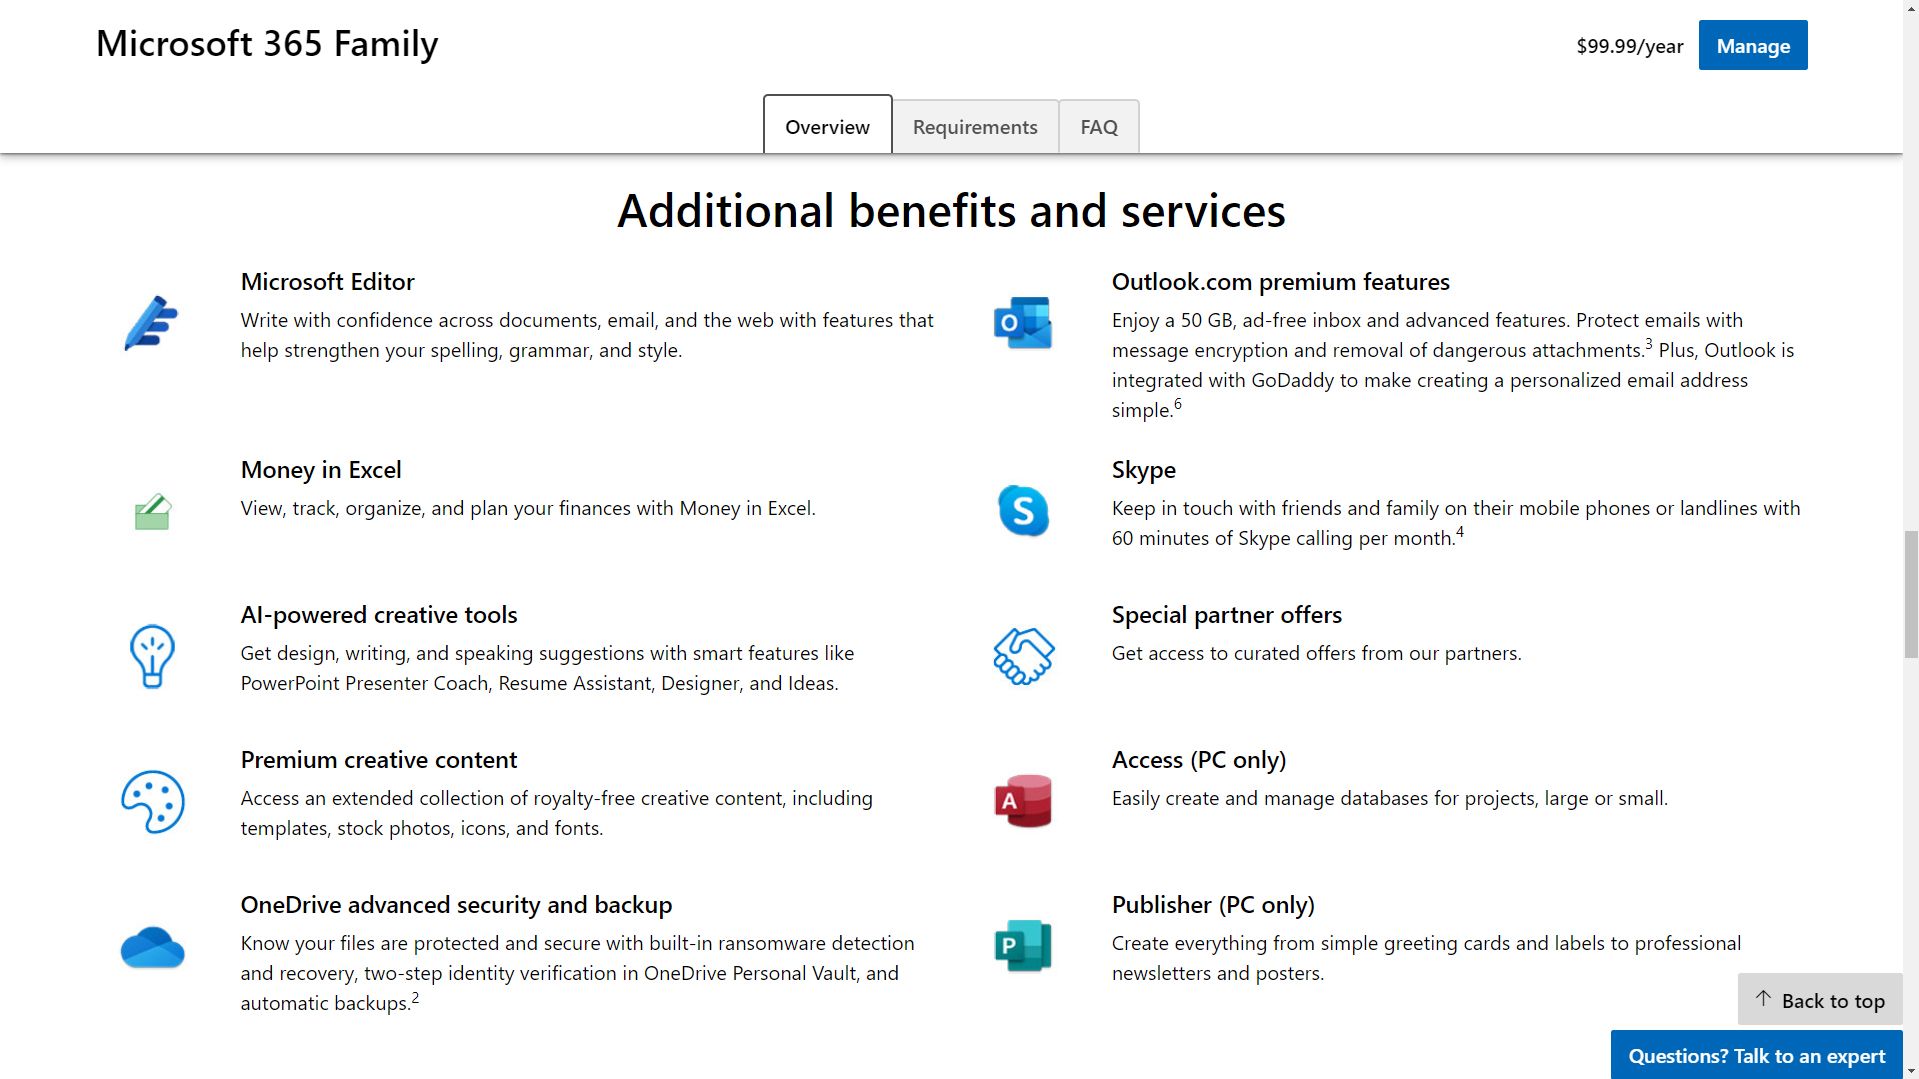 screenshot of additional benefits and services for Microsoft 365 from the Microsoft website